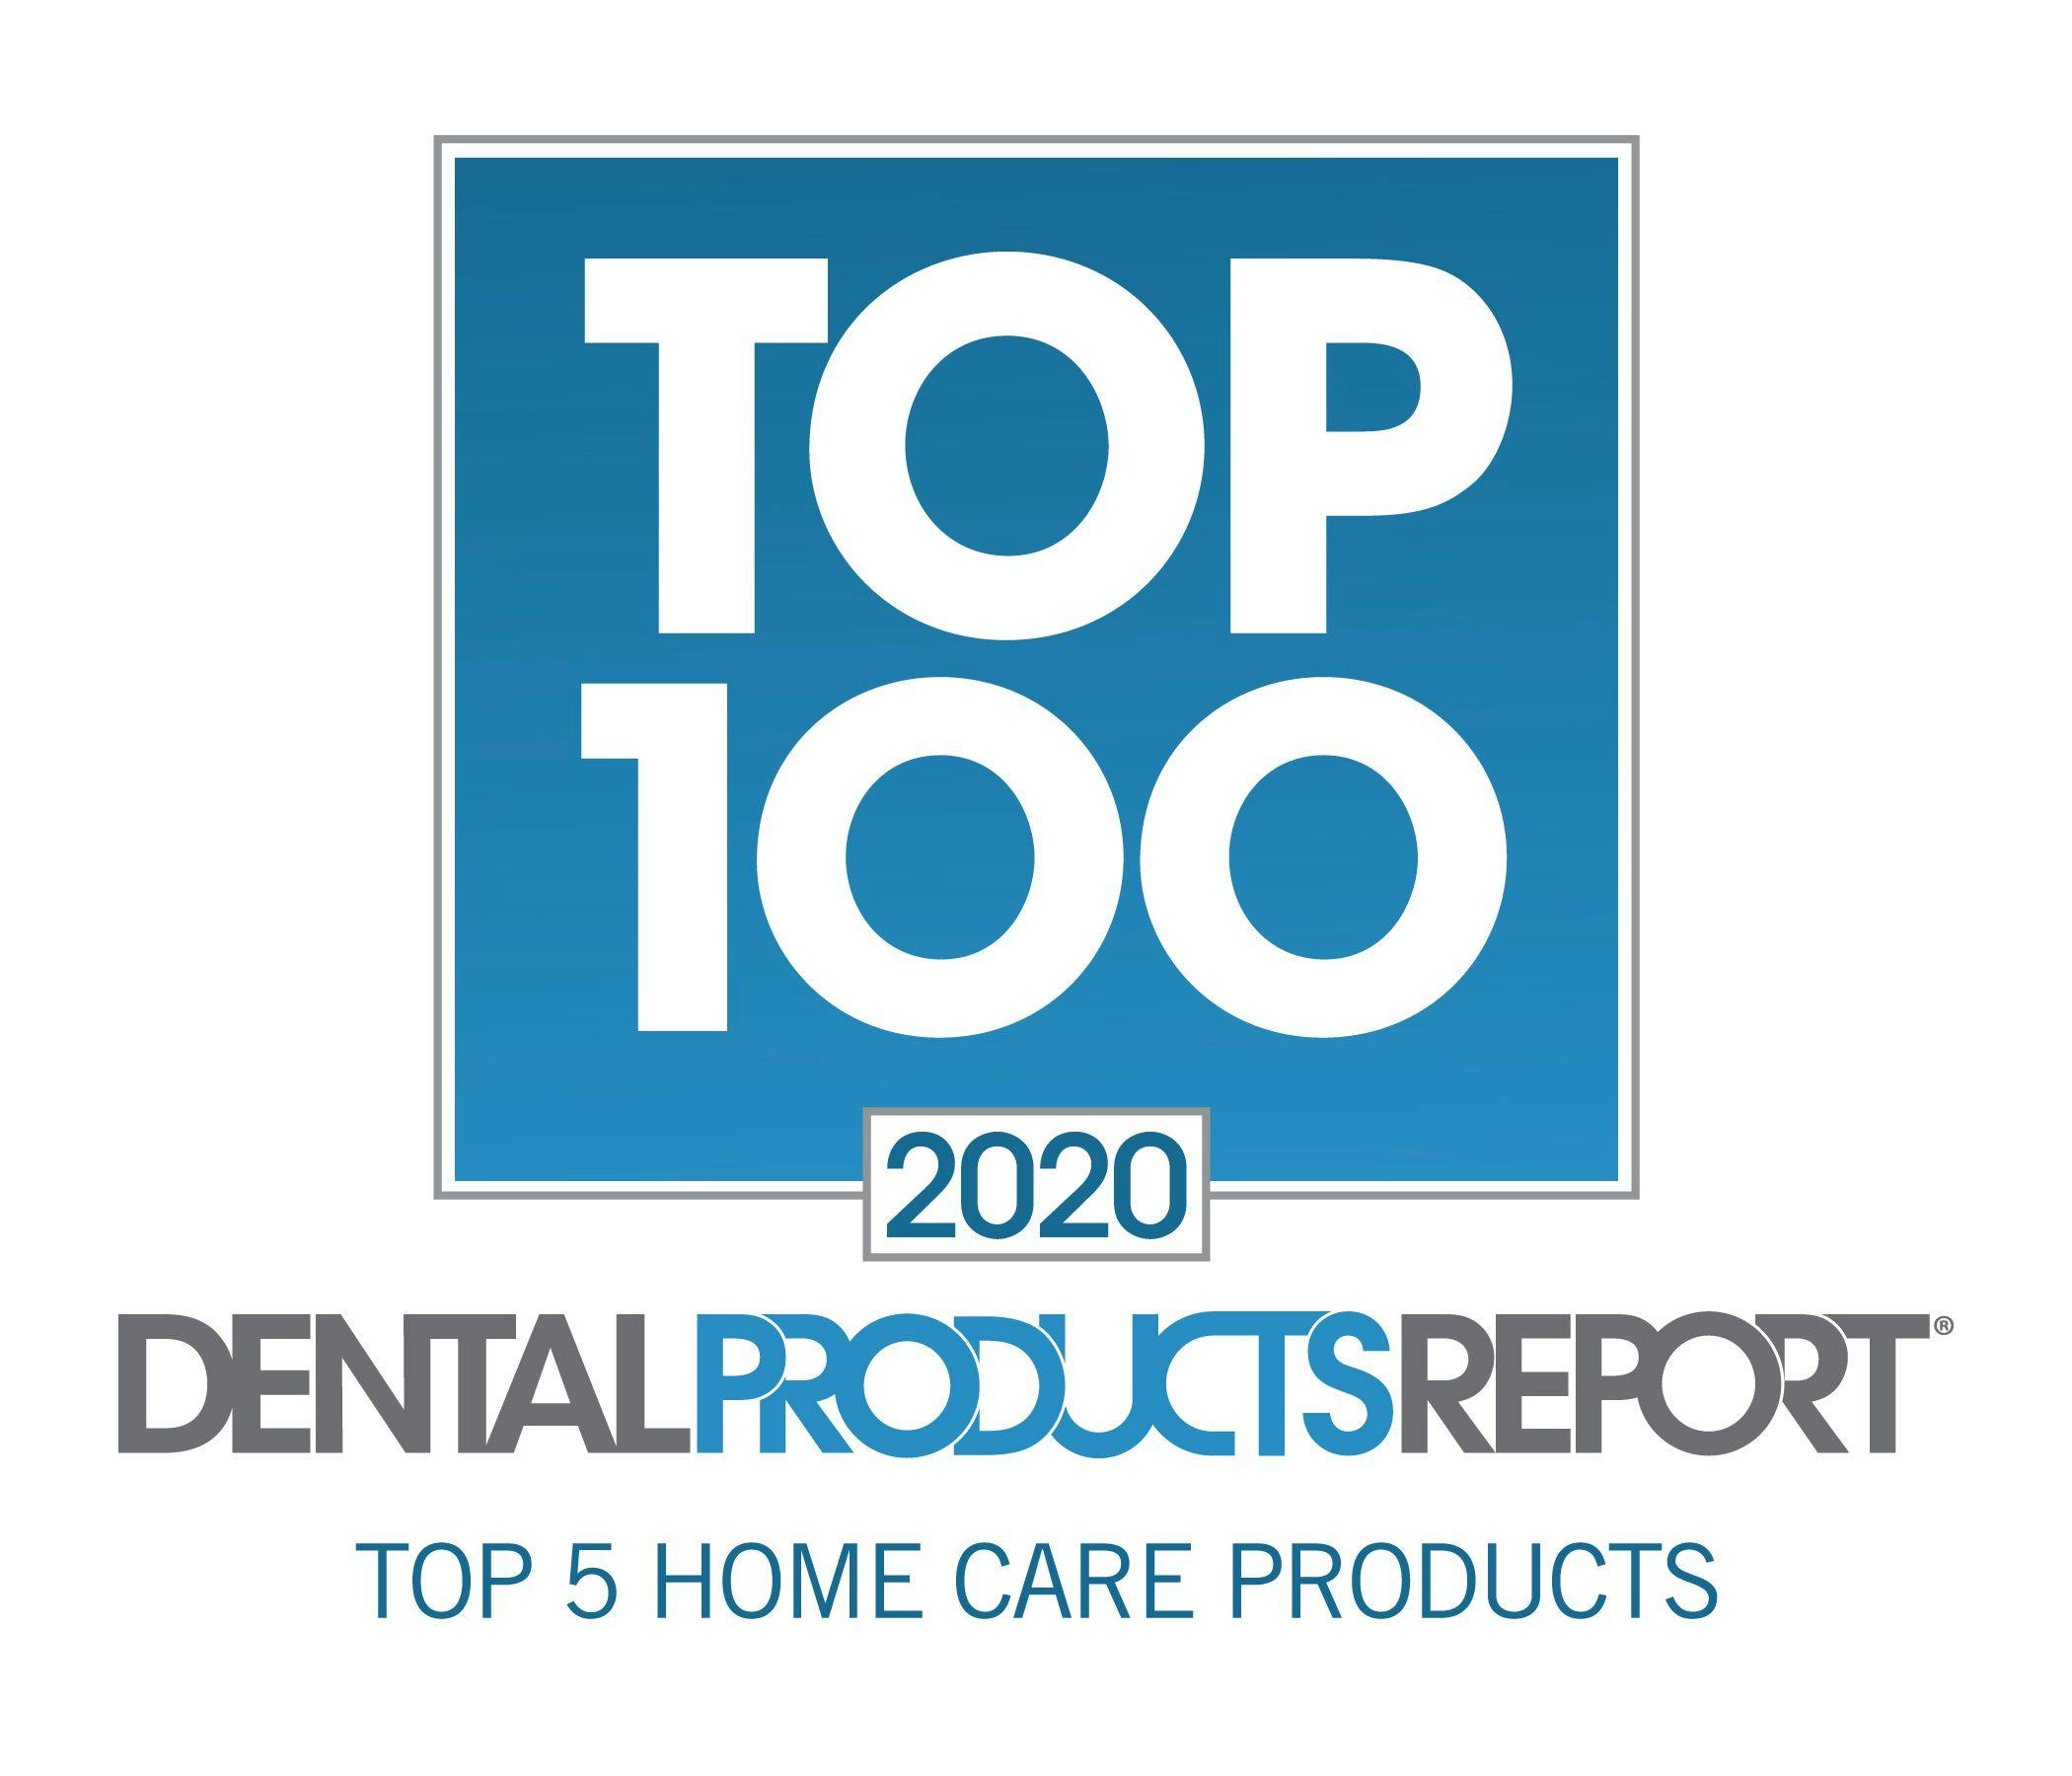 Top 5 Home Care Products of 2020